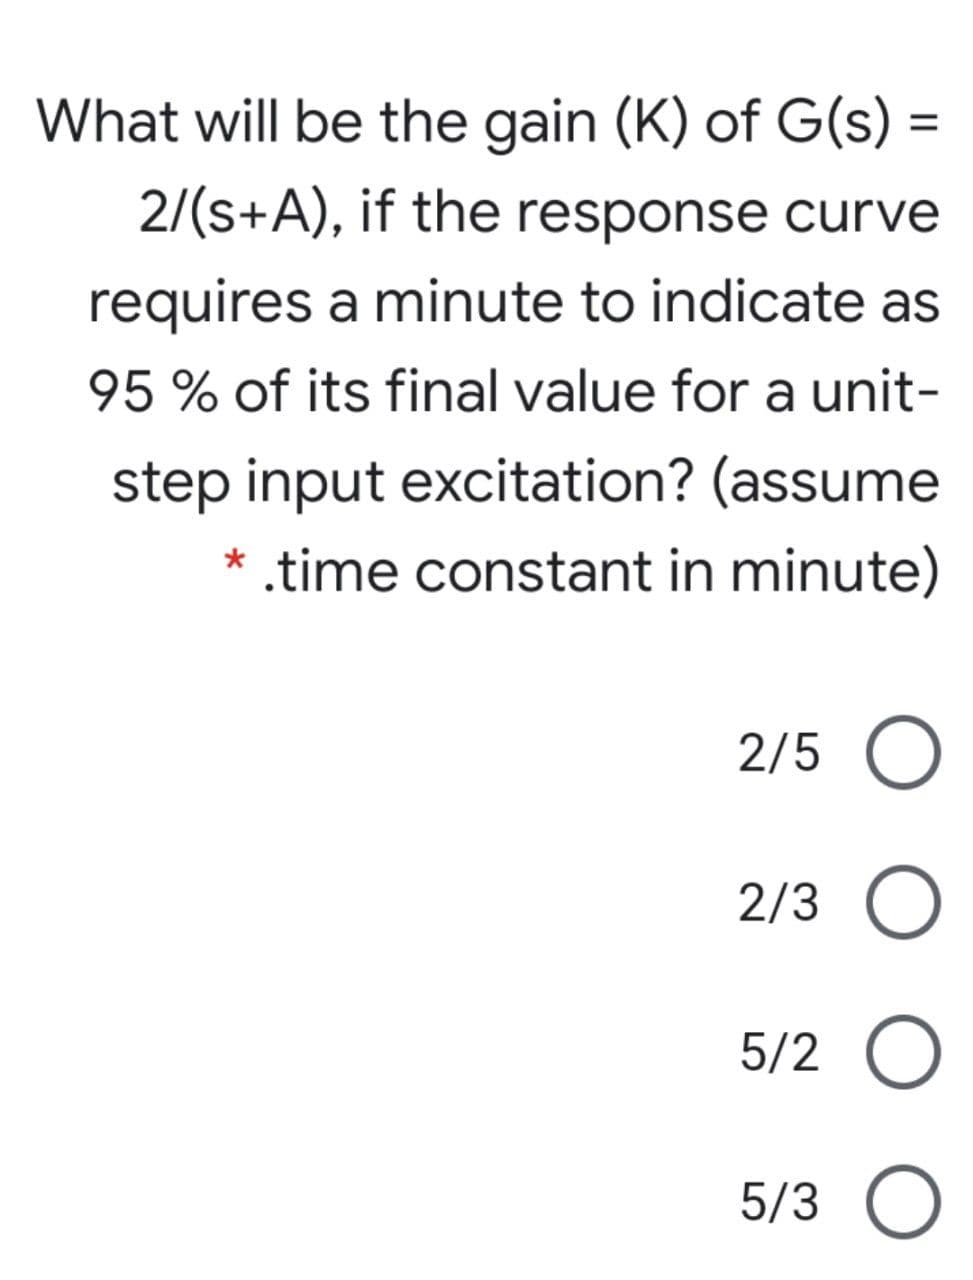 What will be the gain (K) of G(s) =
%3D
2/(s+A), if the response curve
requires a minute to indicate as
95 % of its final value for a unit-
step input excitation? (assume
* .time constant in minute)
2/5 O
2/3
5/2 O
5/3 O
